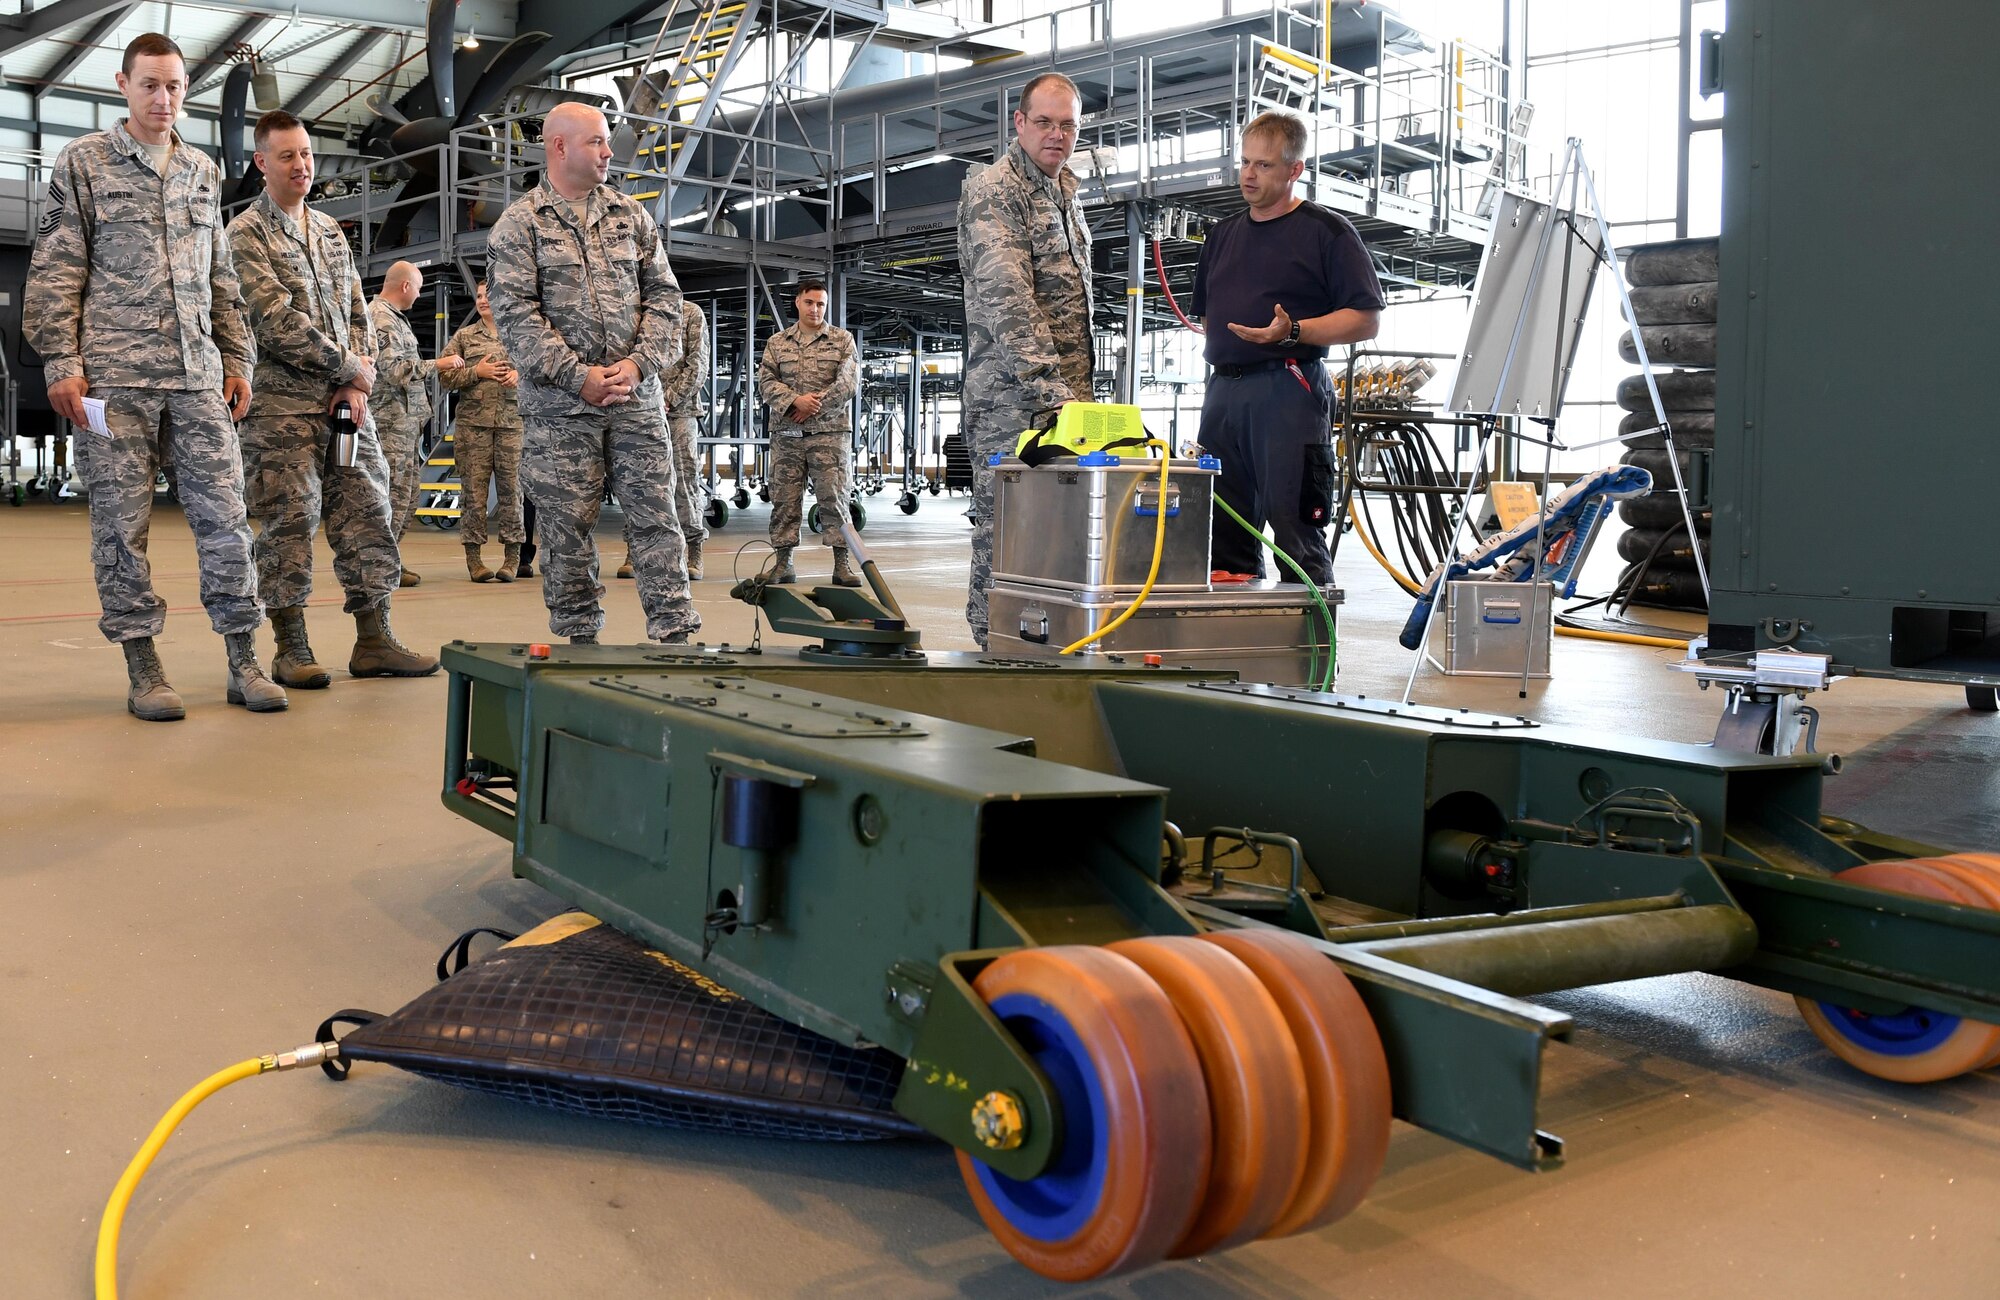 Tino Weichel, 86th Maintenance Squadron aero repair aircraft mechanic describes capabilities of the 86th Maintenance Group to Brig. Gen. Richard G. Moore, Jr., 86th Airlift Wing commander, during a demonstration Aug. 31, 2016 at Ramstein Air Base, Germany. The 86th MXG maintains U.S. Air Forces in Europe's only assigned distinguished visitor airlift and 24/7 aeromedical evacuation operations. (U.S. Air Force photo/Senior Airman Tryphena Mayhugh)